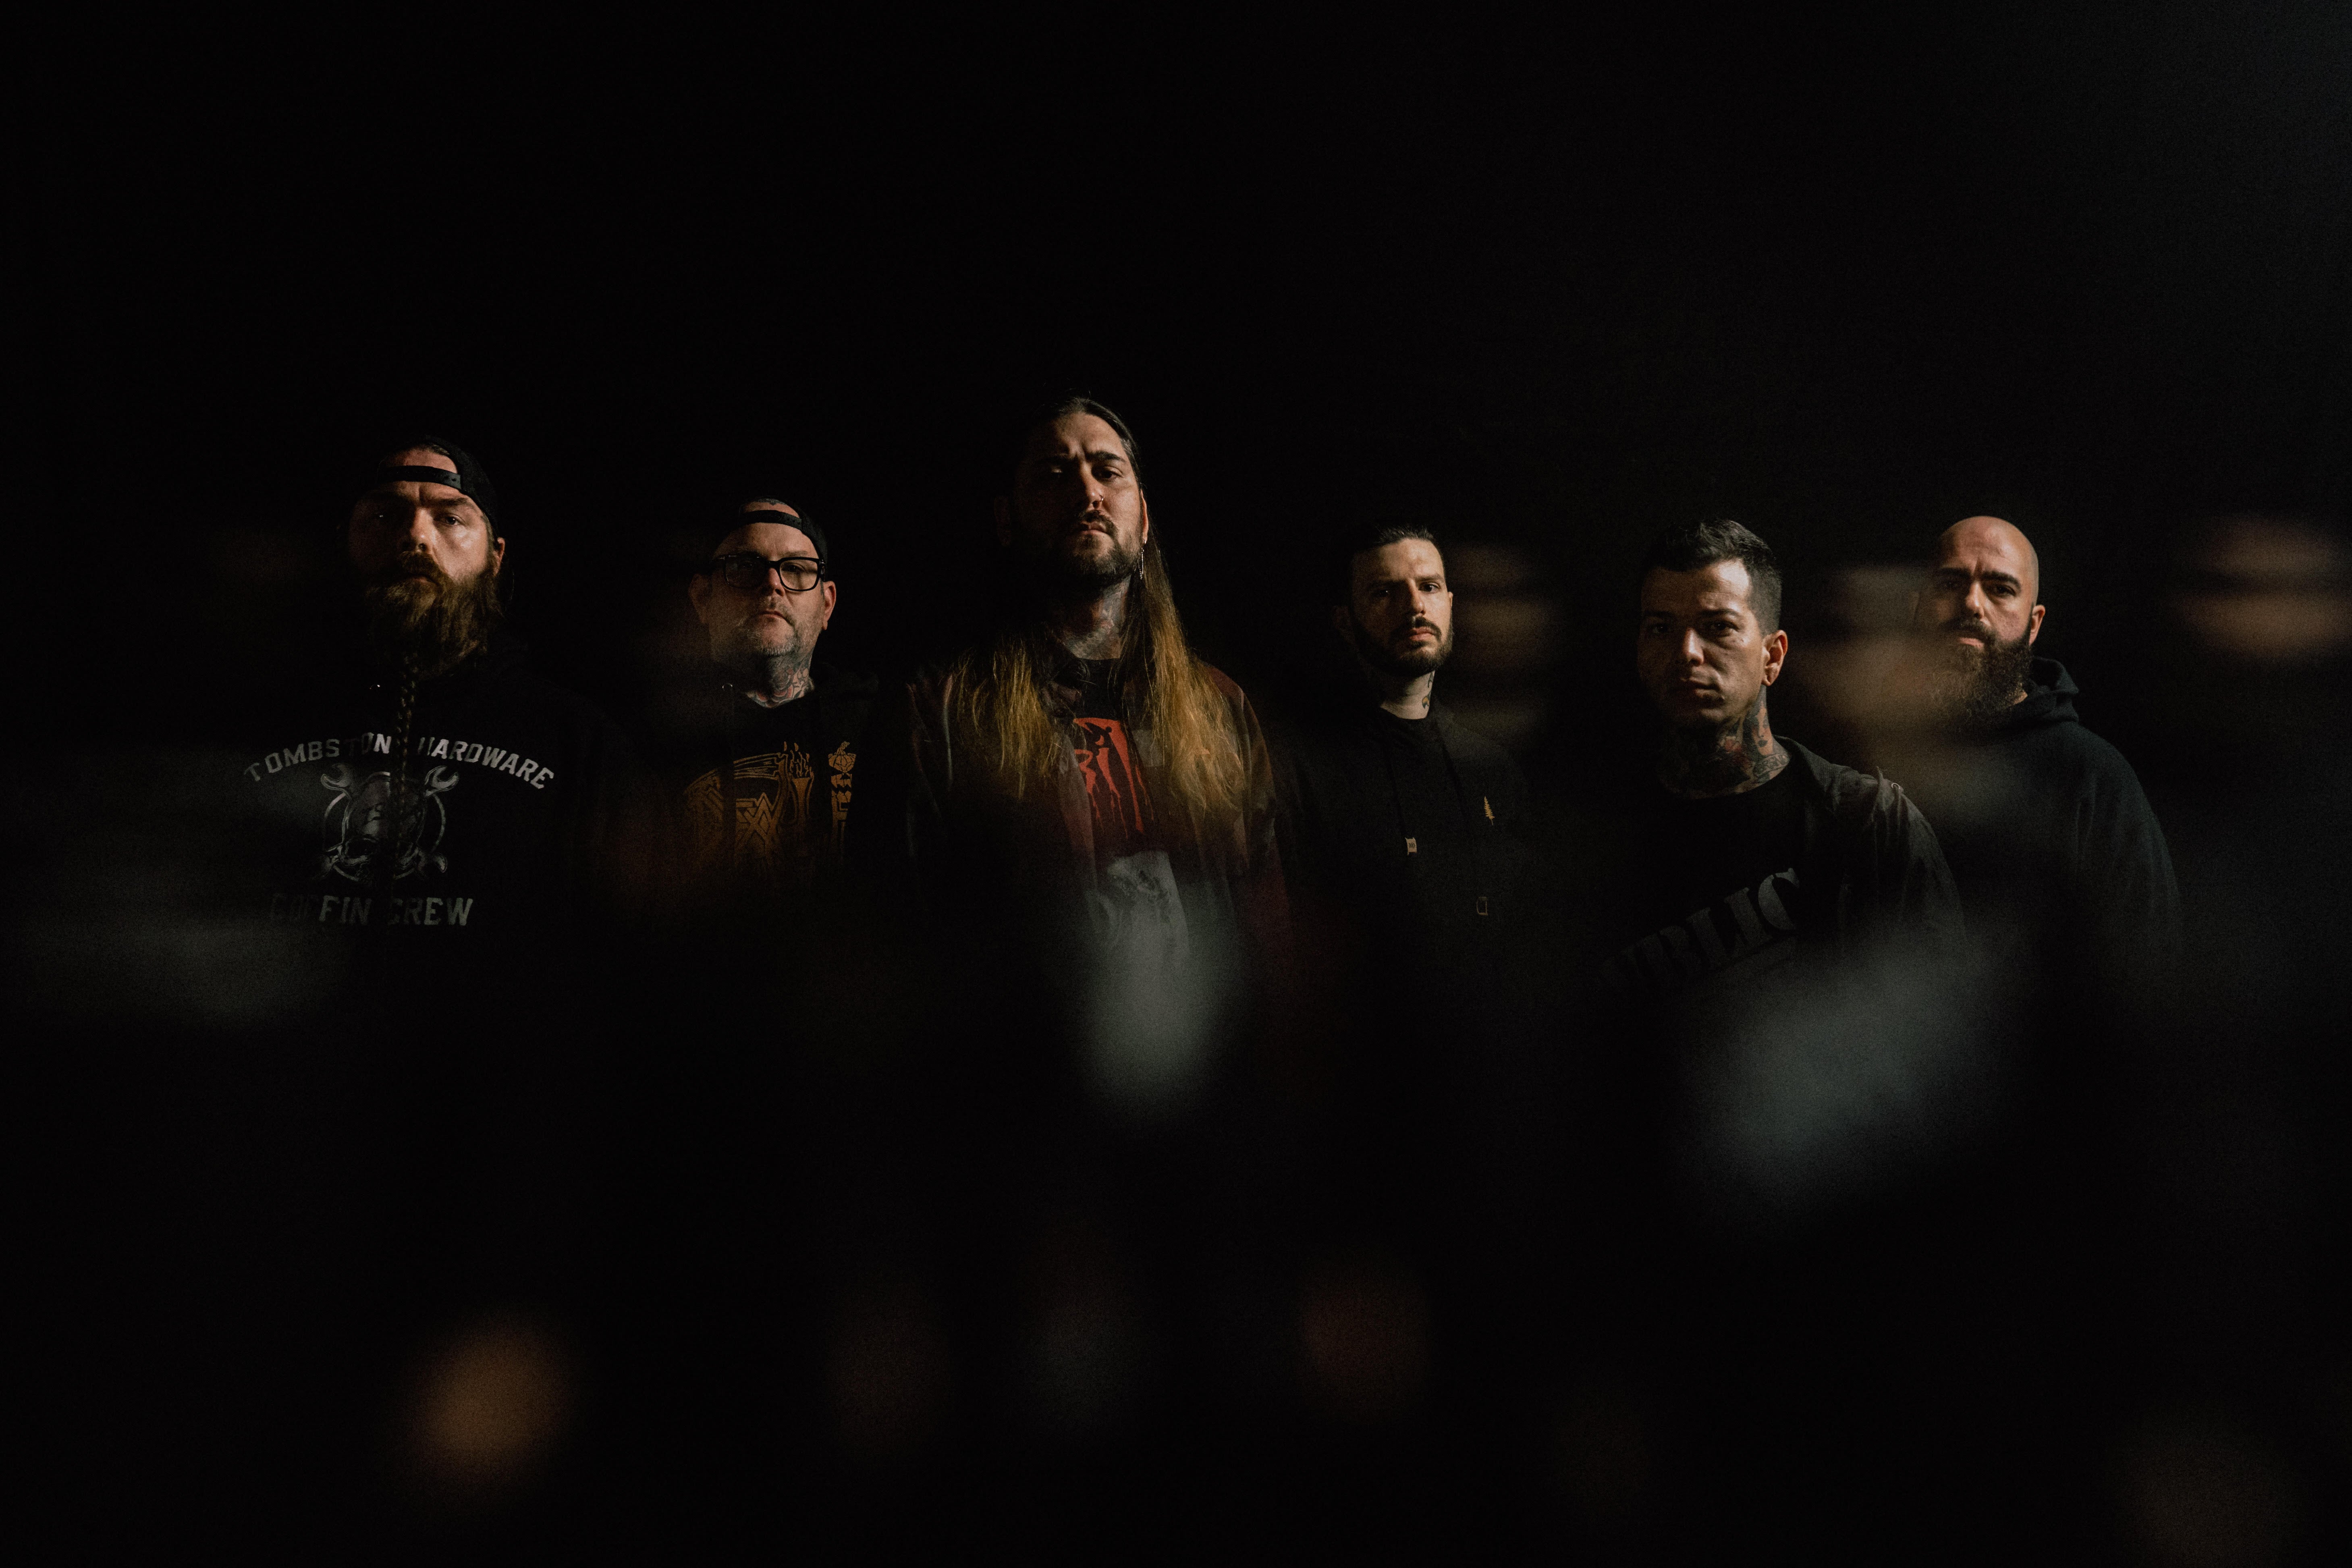 Fit for an Autopsy & Sylosis in London promo photo for Priority from O2 presale offer code